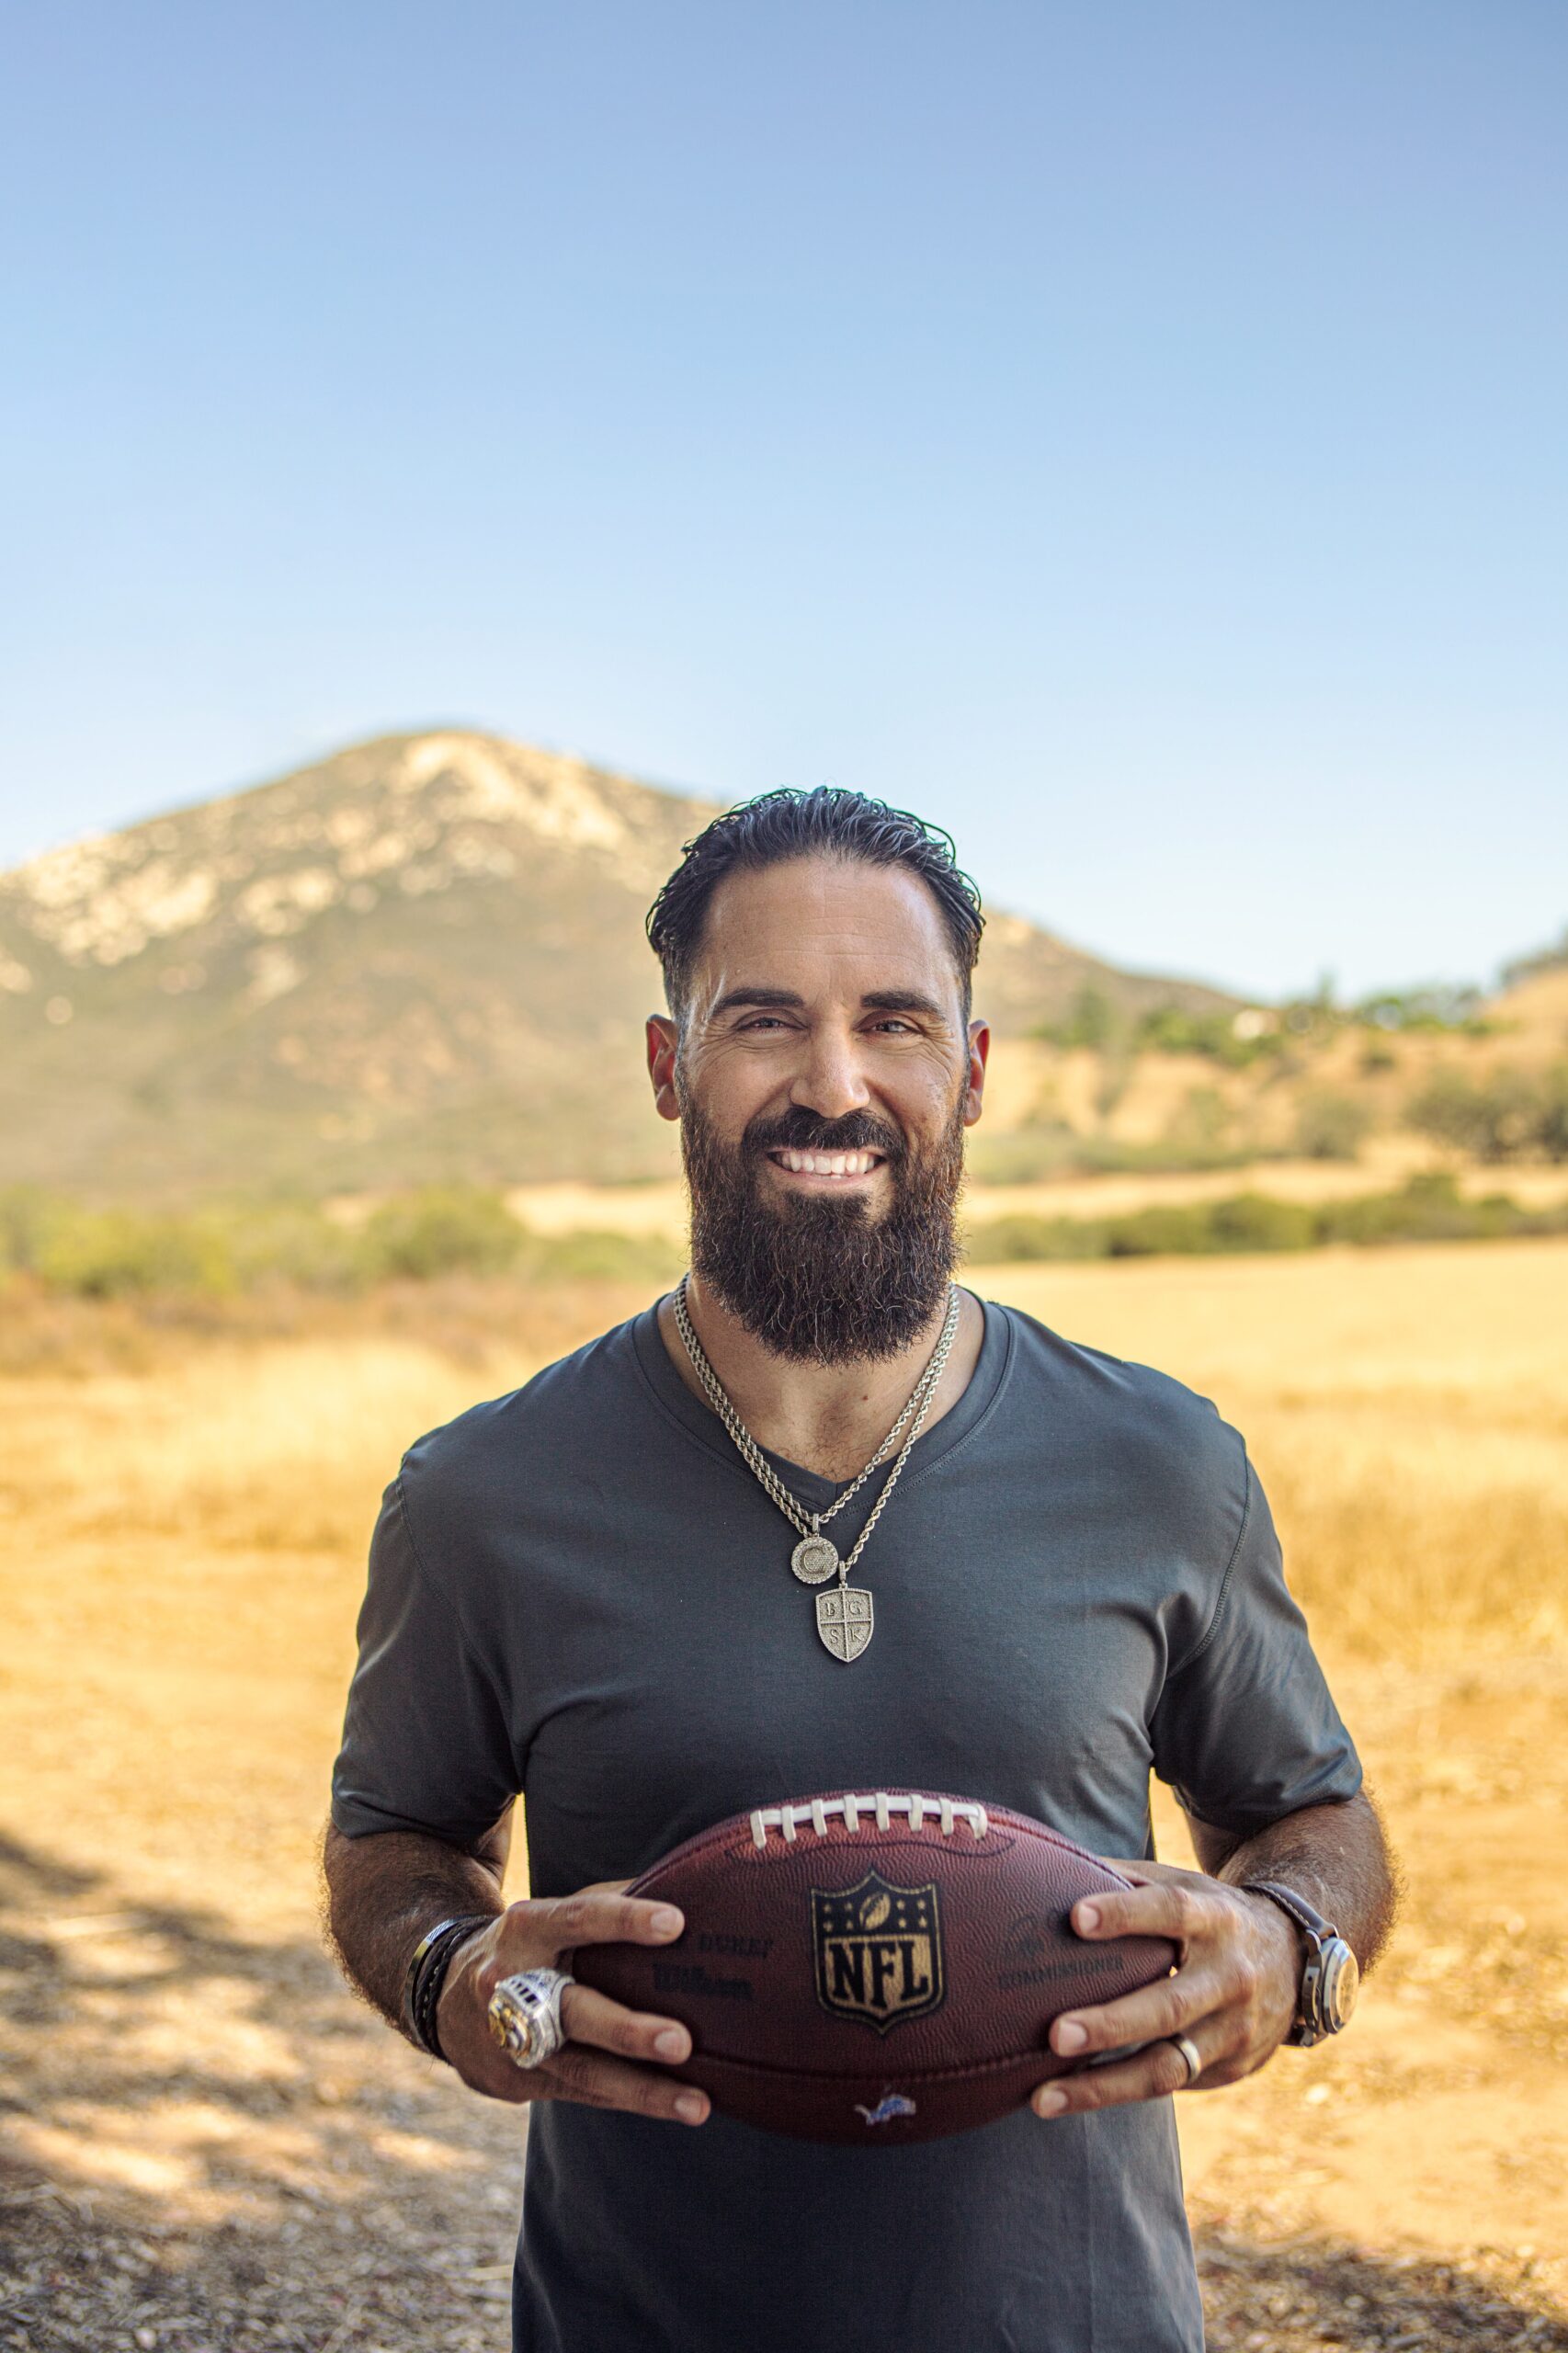 Super Bowl Champion Eric Weddle Exemplifies Humility On and Off